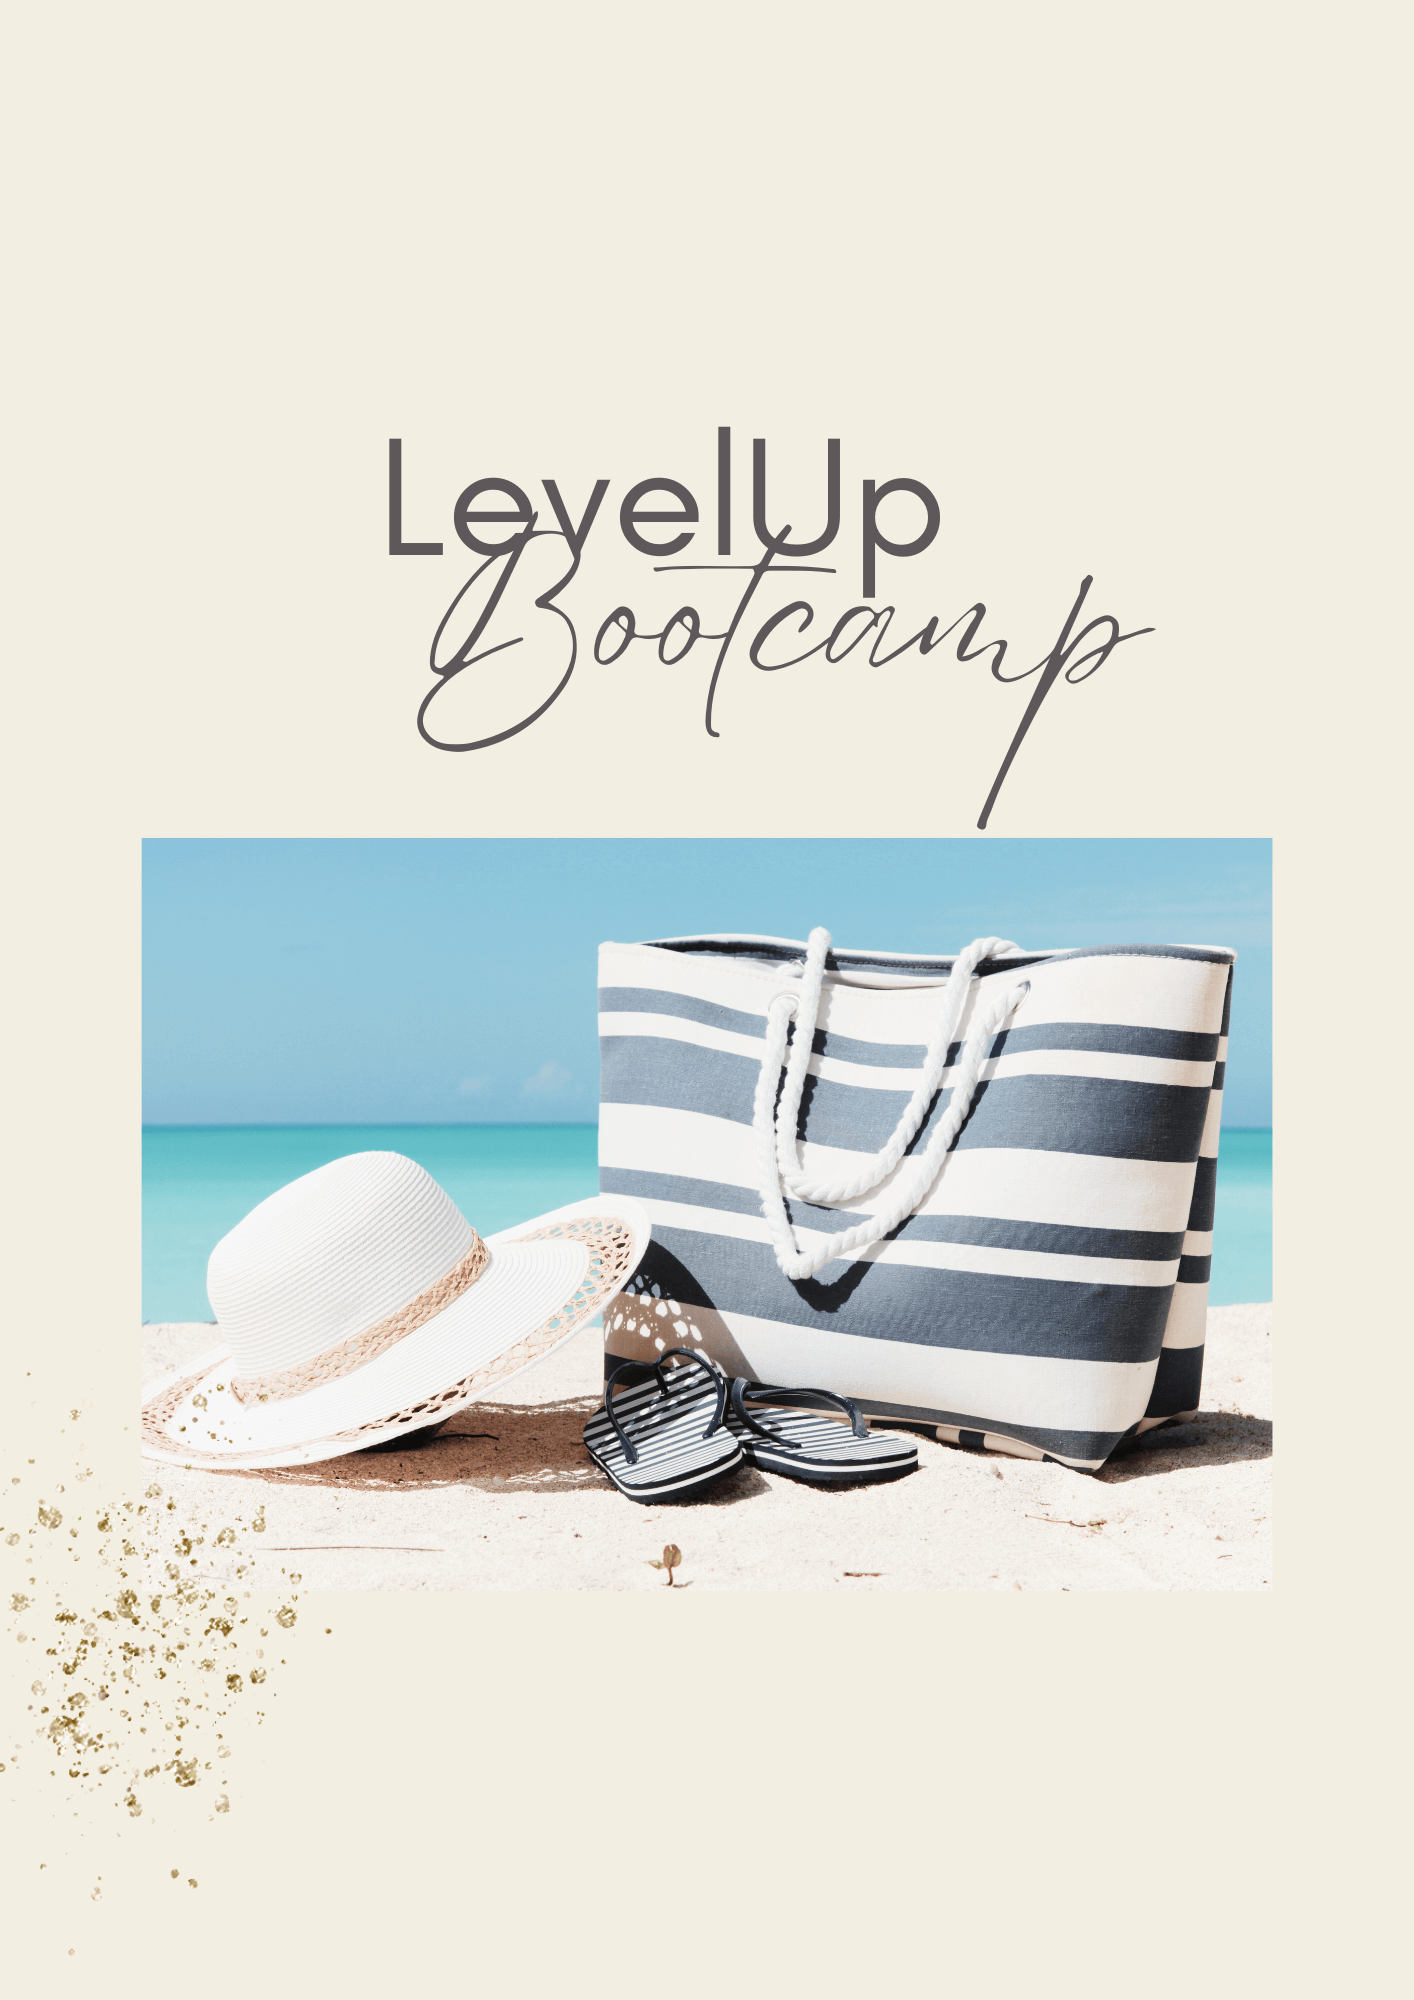 LevelUP Bootcamp